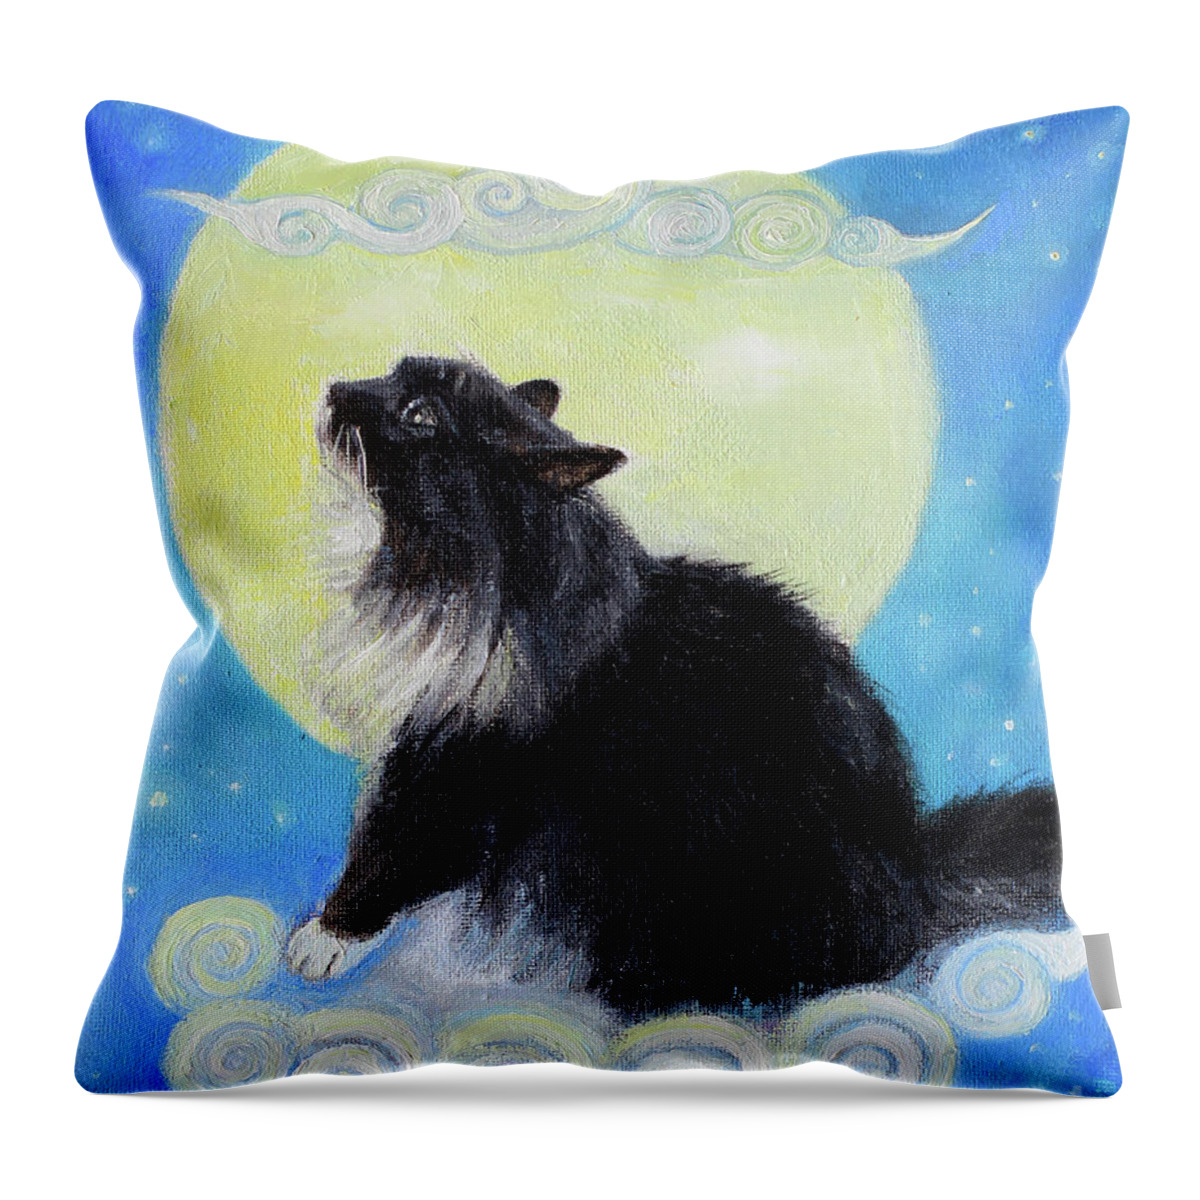 Moon Throw Pillow featuring the painting Tillie by Moonlight by Manami Lingerfelt